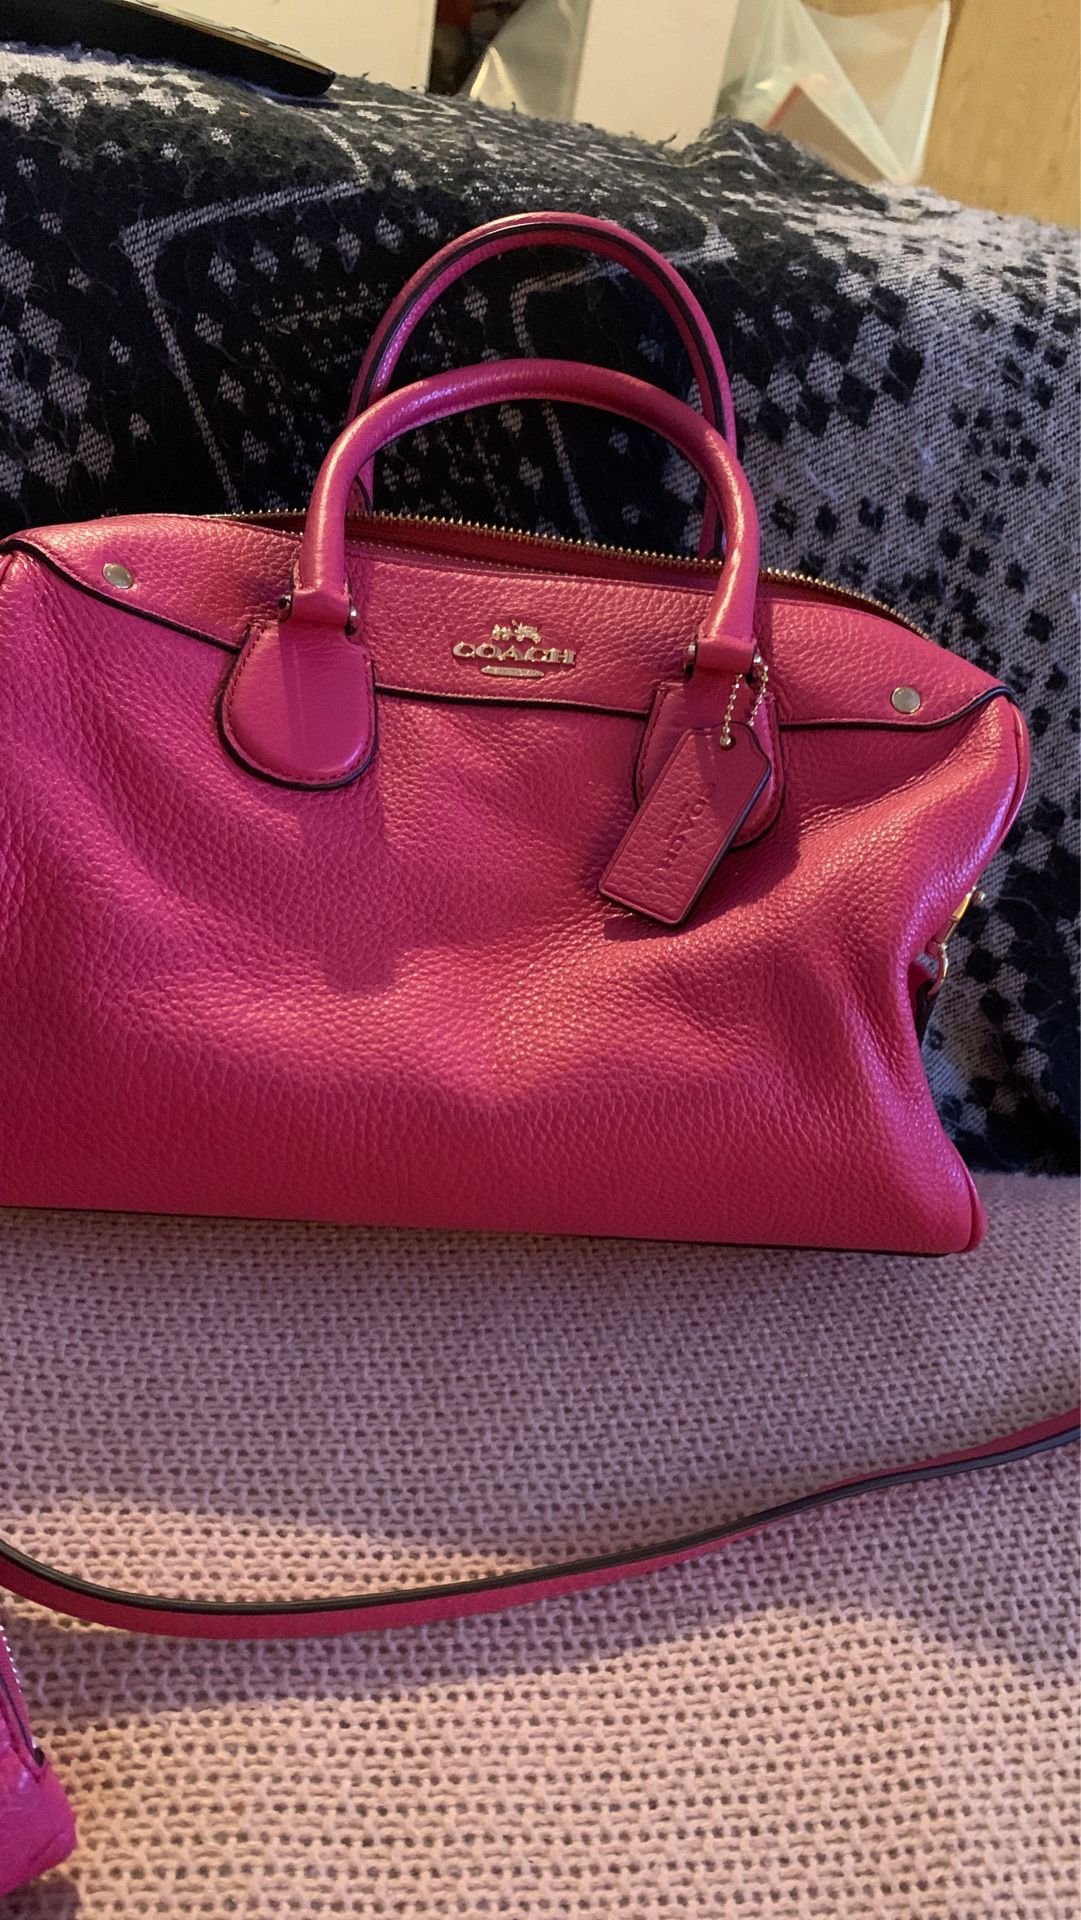 Pink coach purse and wallet for Sale in Beaumont, CA - OfferUp